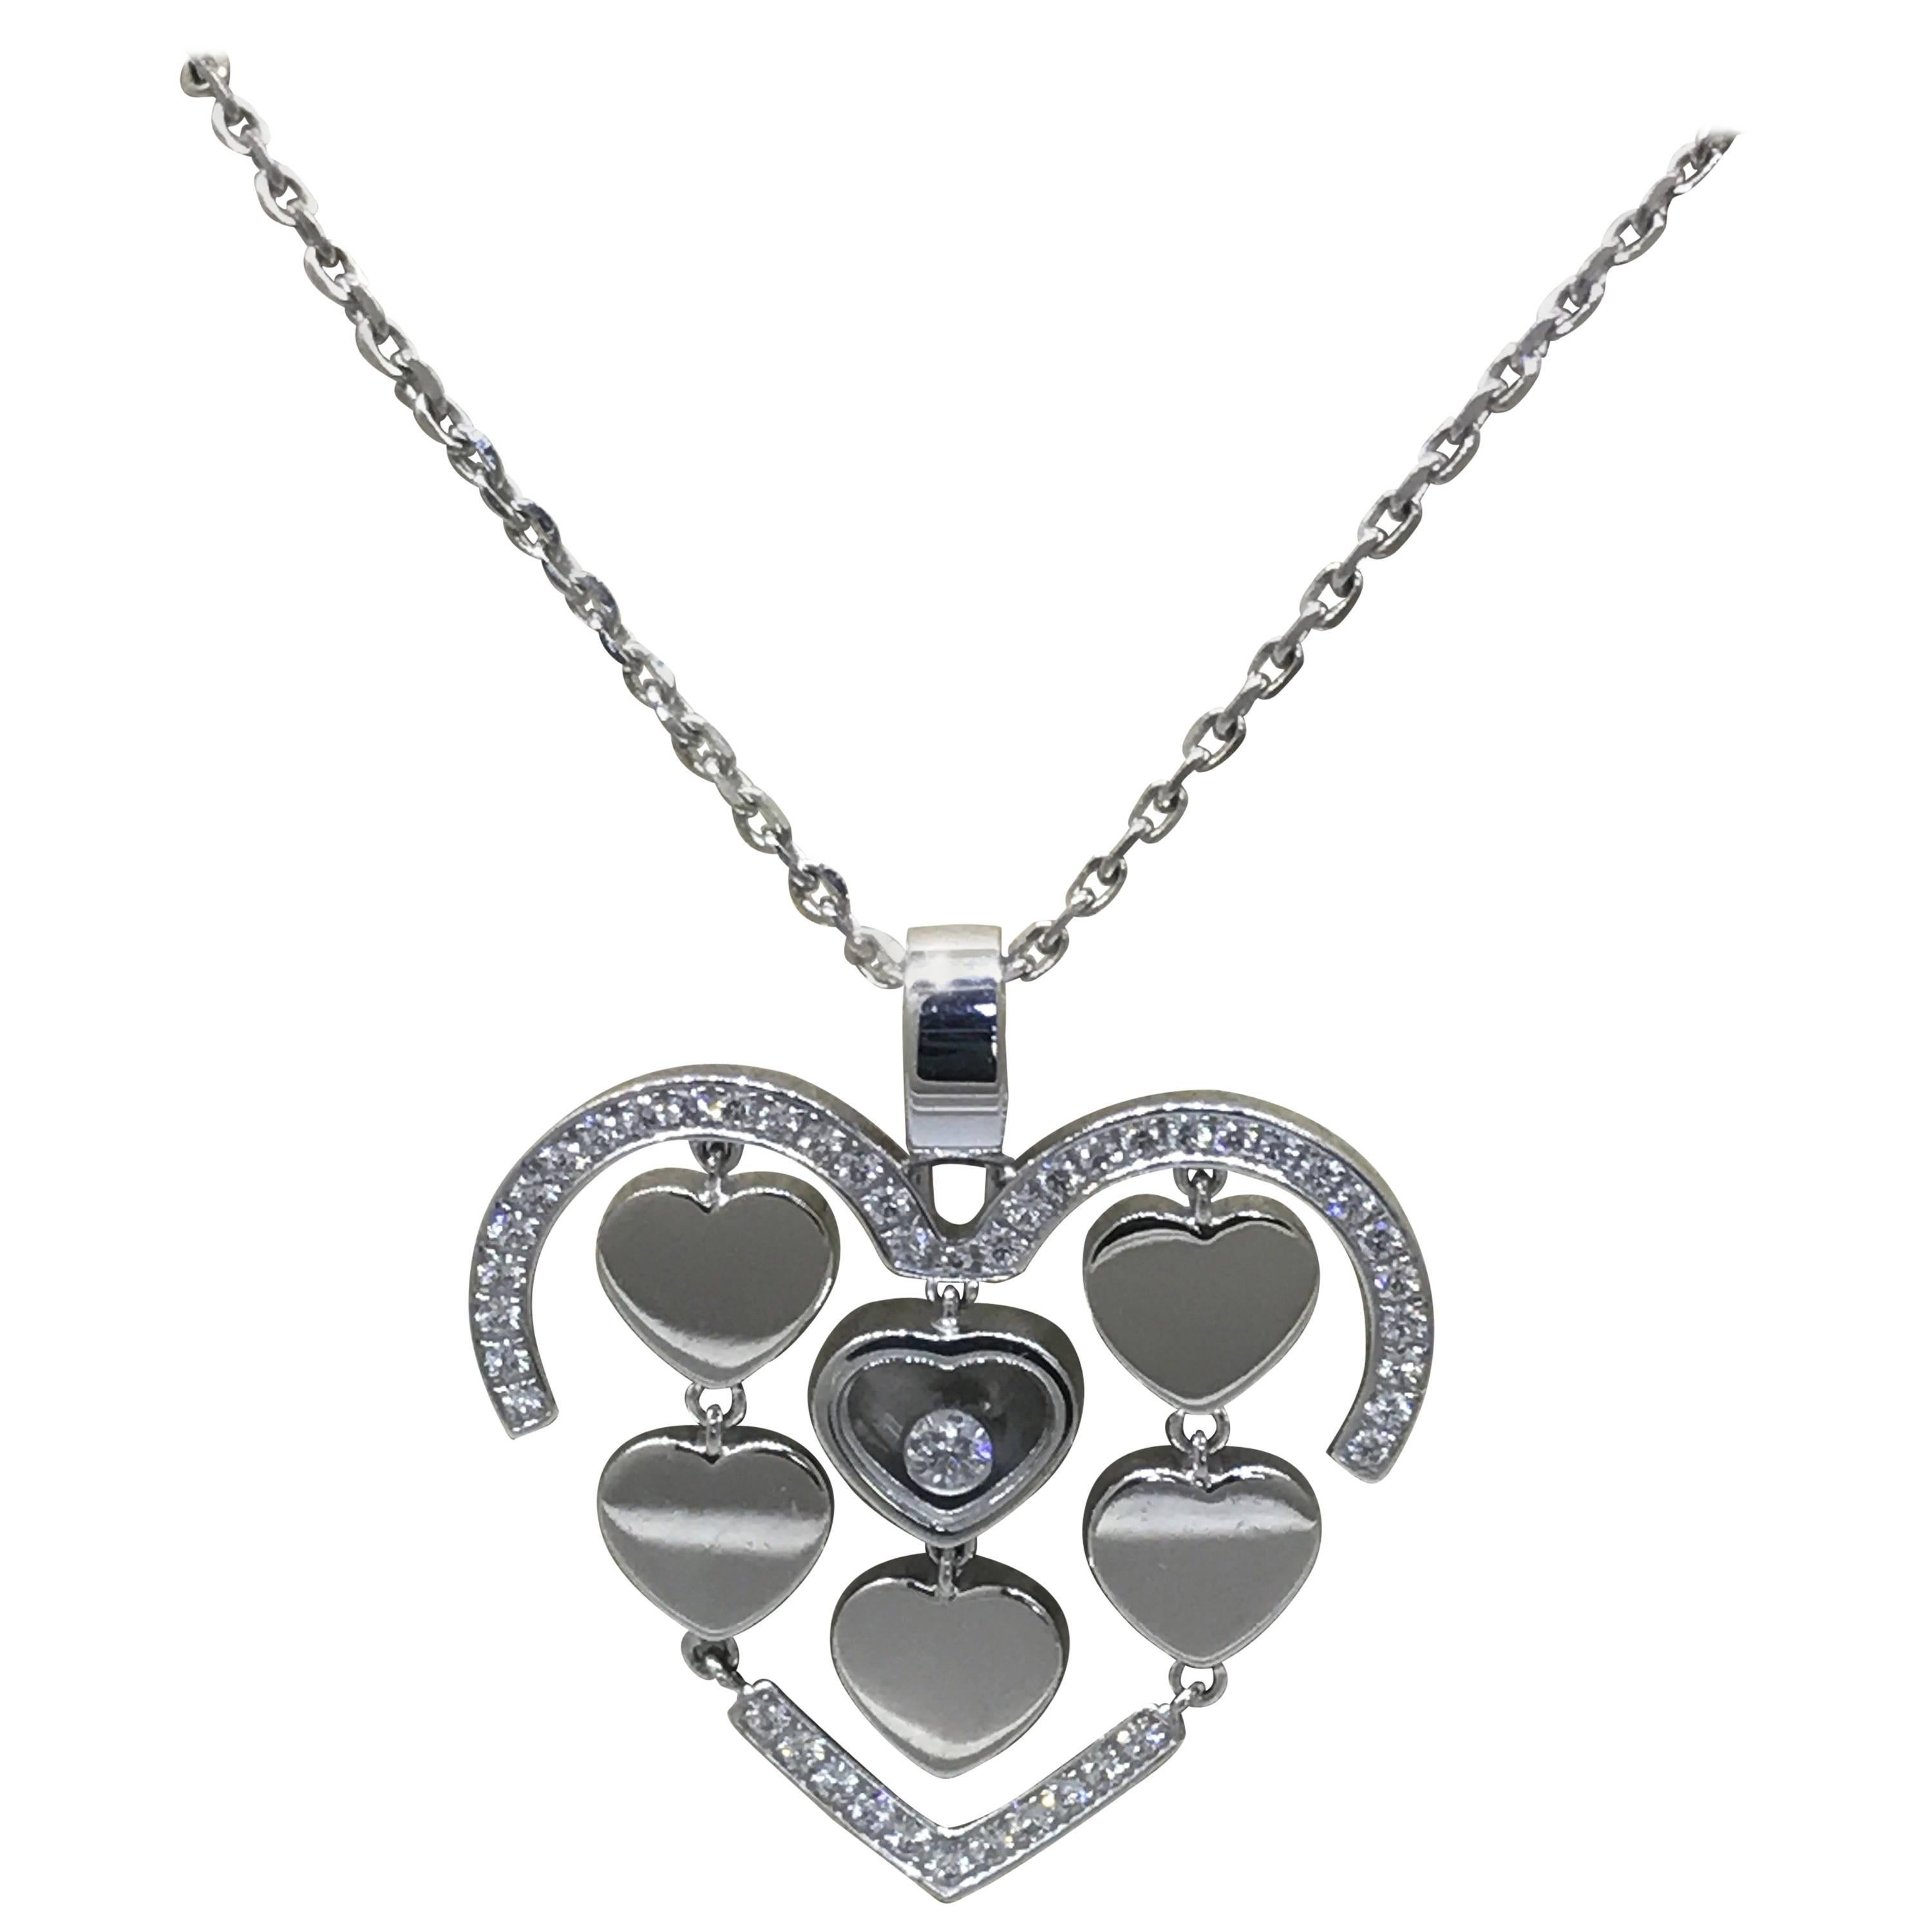 Chopard Amore Hearts 18 Karat White Gold and Diamond Pendant / Necklace 79/7219 For Sale